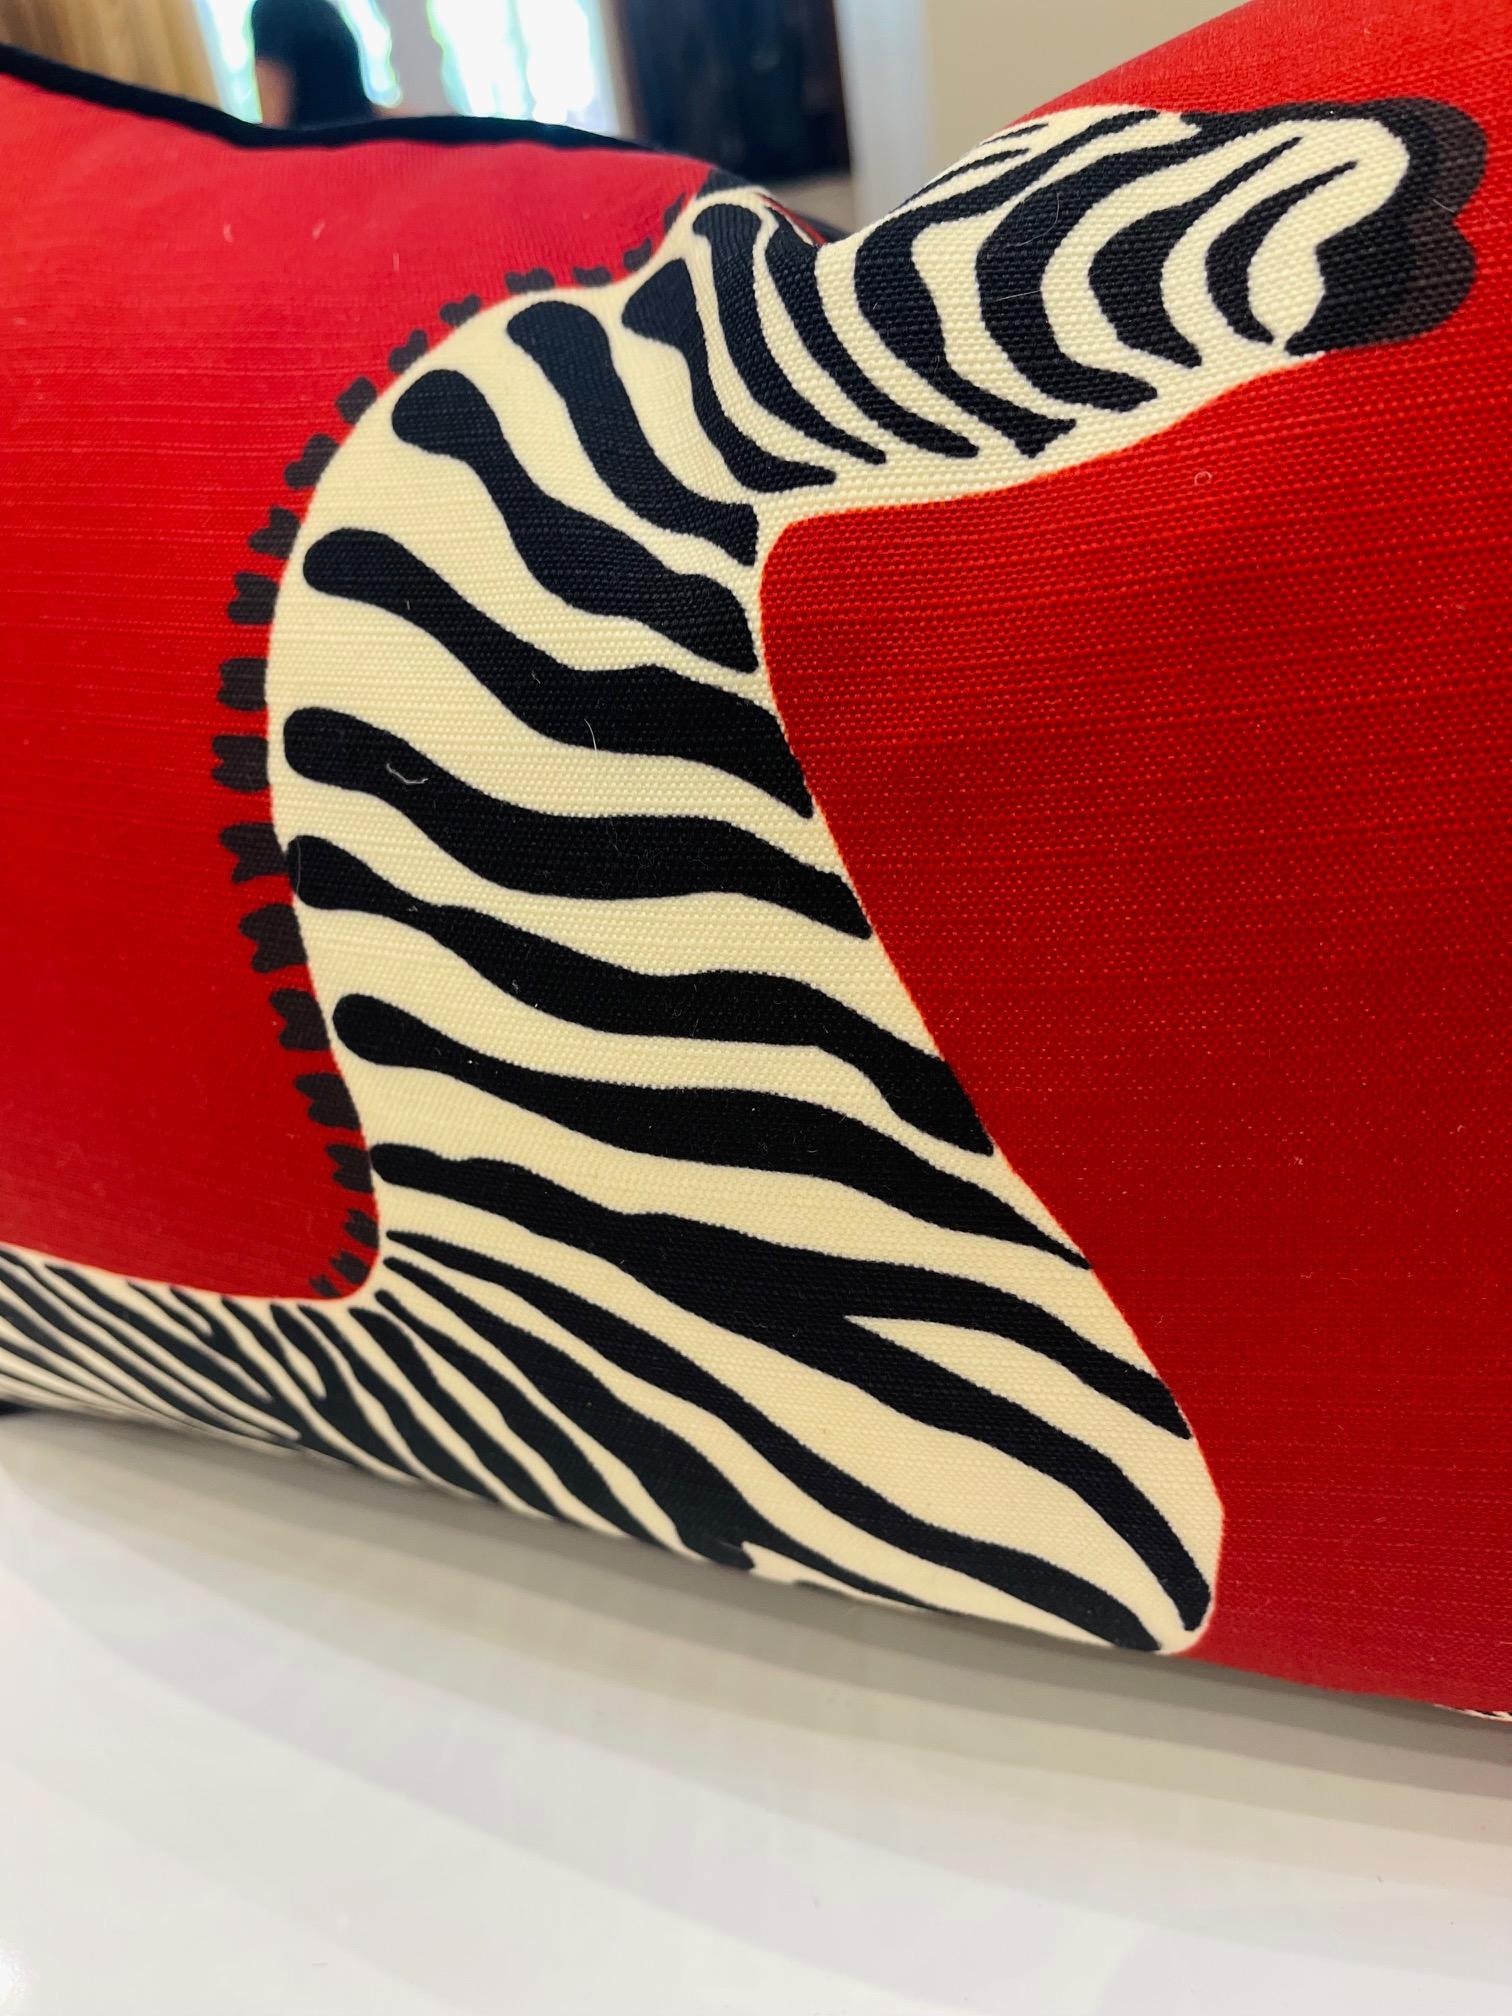 This luxury plush pillow is a product of the Art by Gomez atelier. The front is fitted with a rich, vibrant red that supports a pattern with galloping zebras. The fabric is from the archives of the luxurious House of Scalamandre. The back is a rich